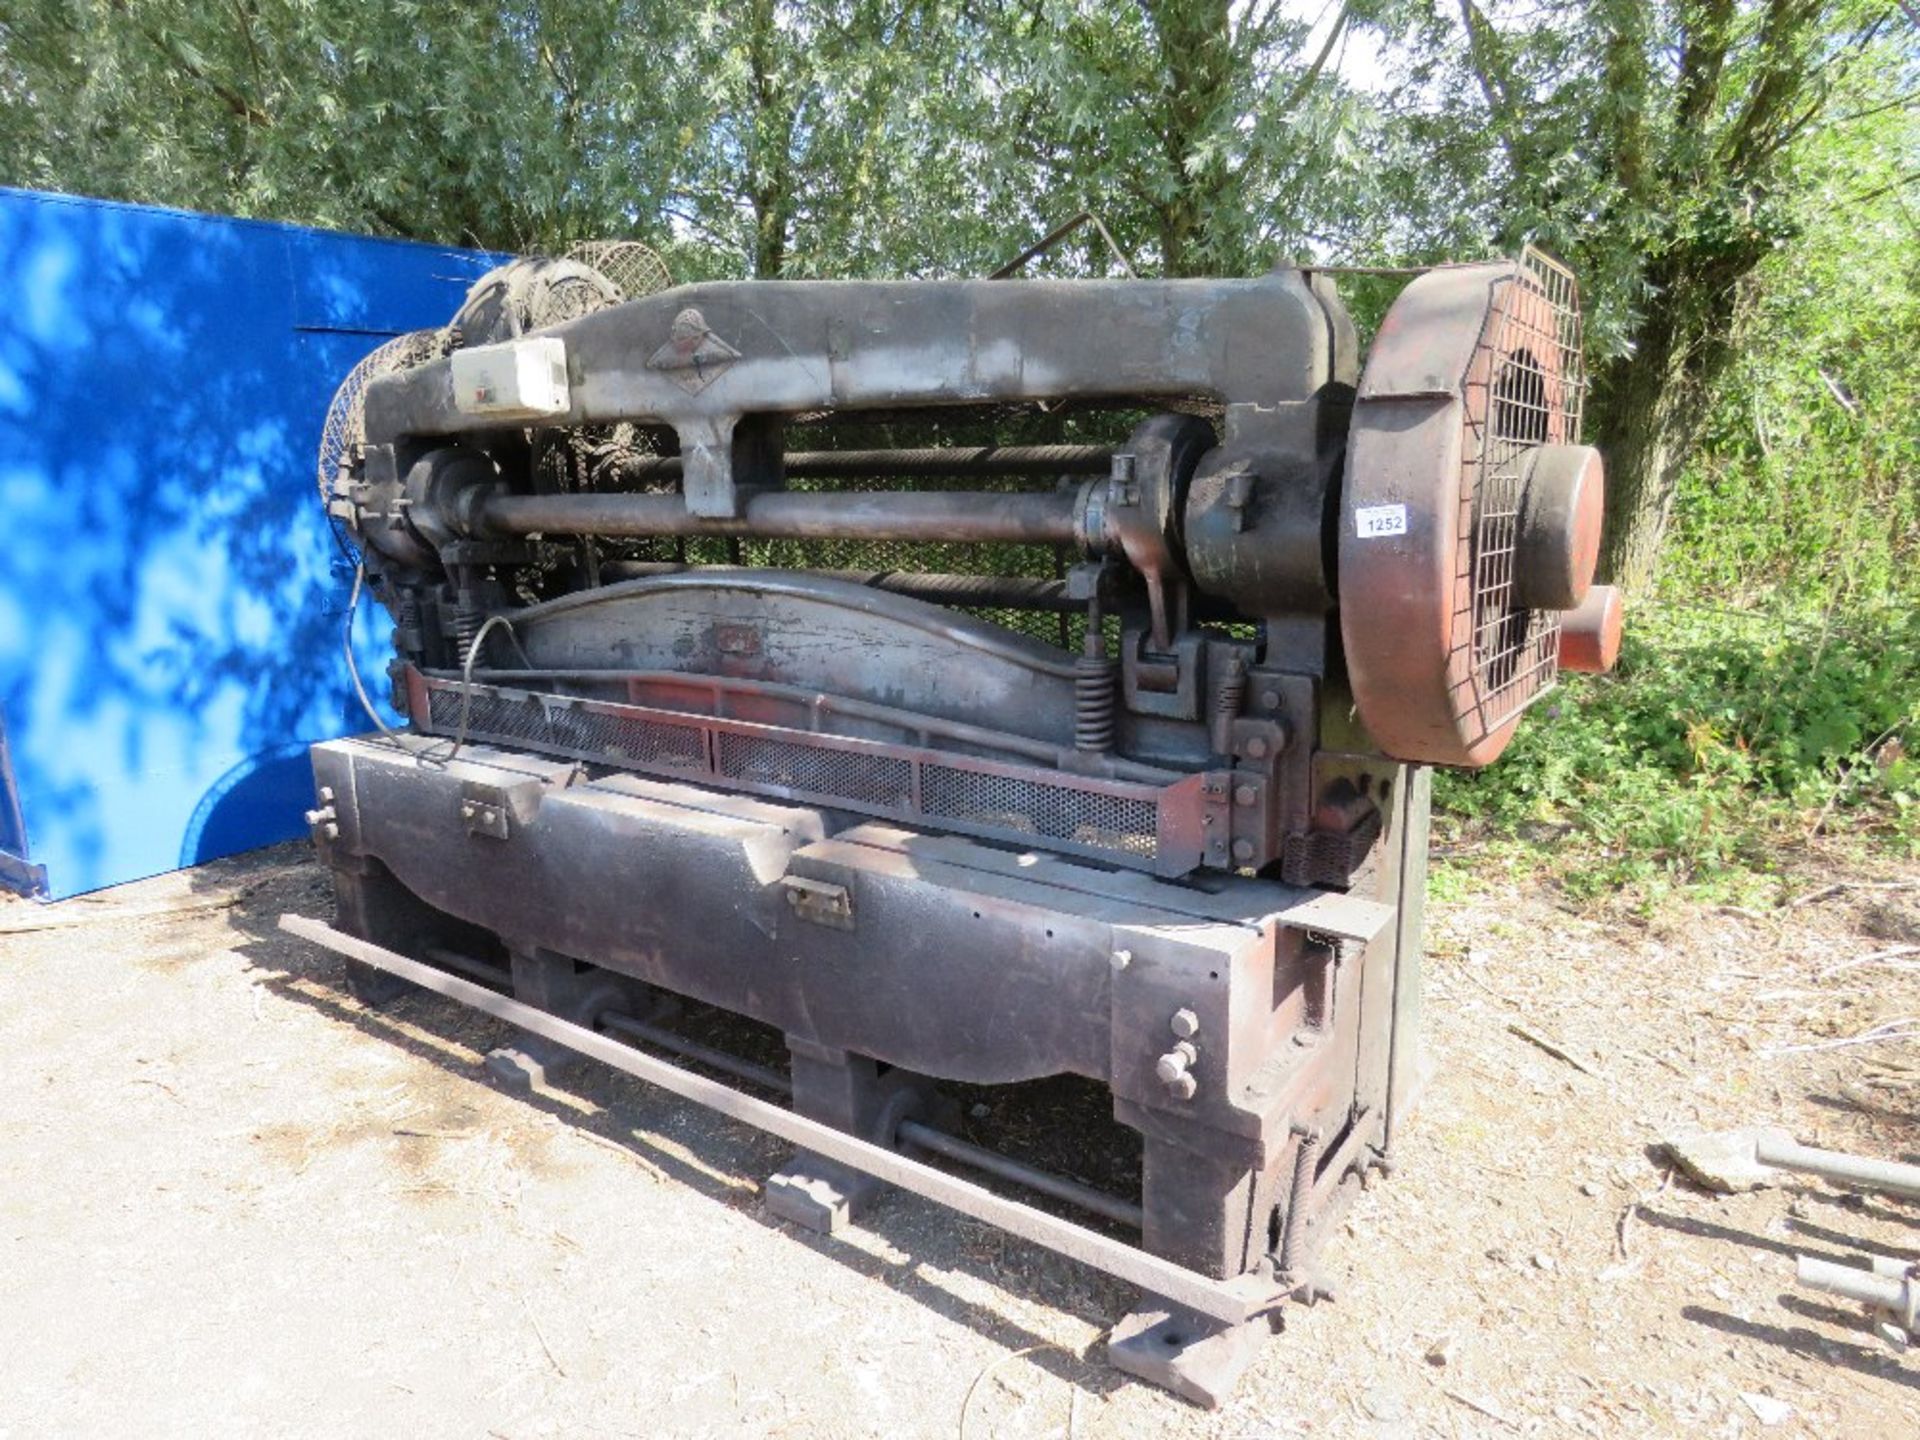 EDWARDS OLD METAL WORKING GUILLOTENE UNIT, WEIGHT 6TONNES APPROX (BUYER TO ARRANGE CRANEAGE, WE CAN